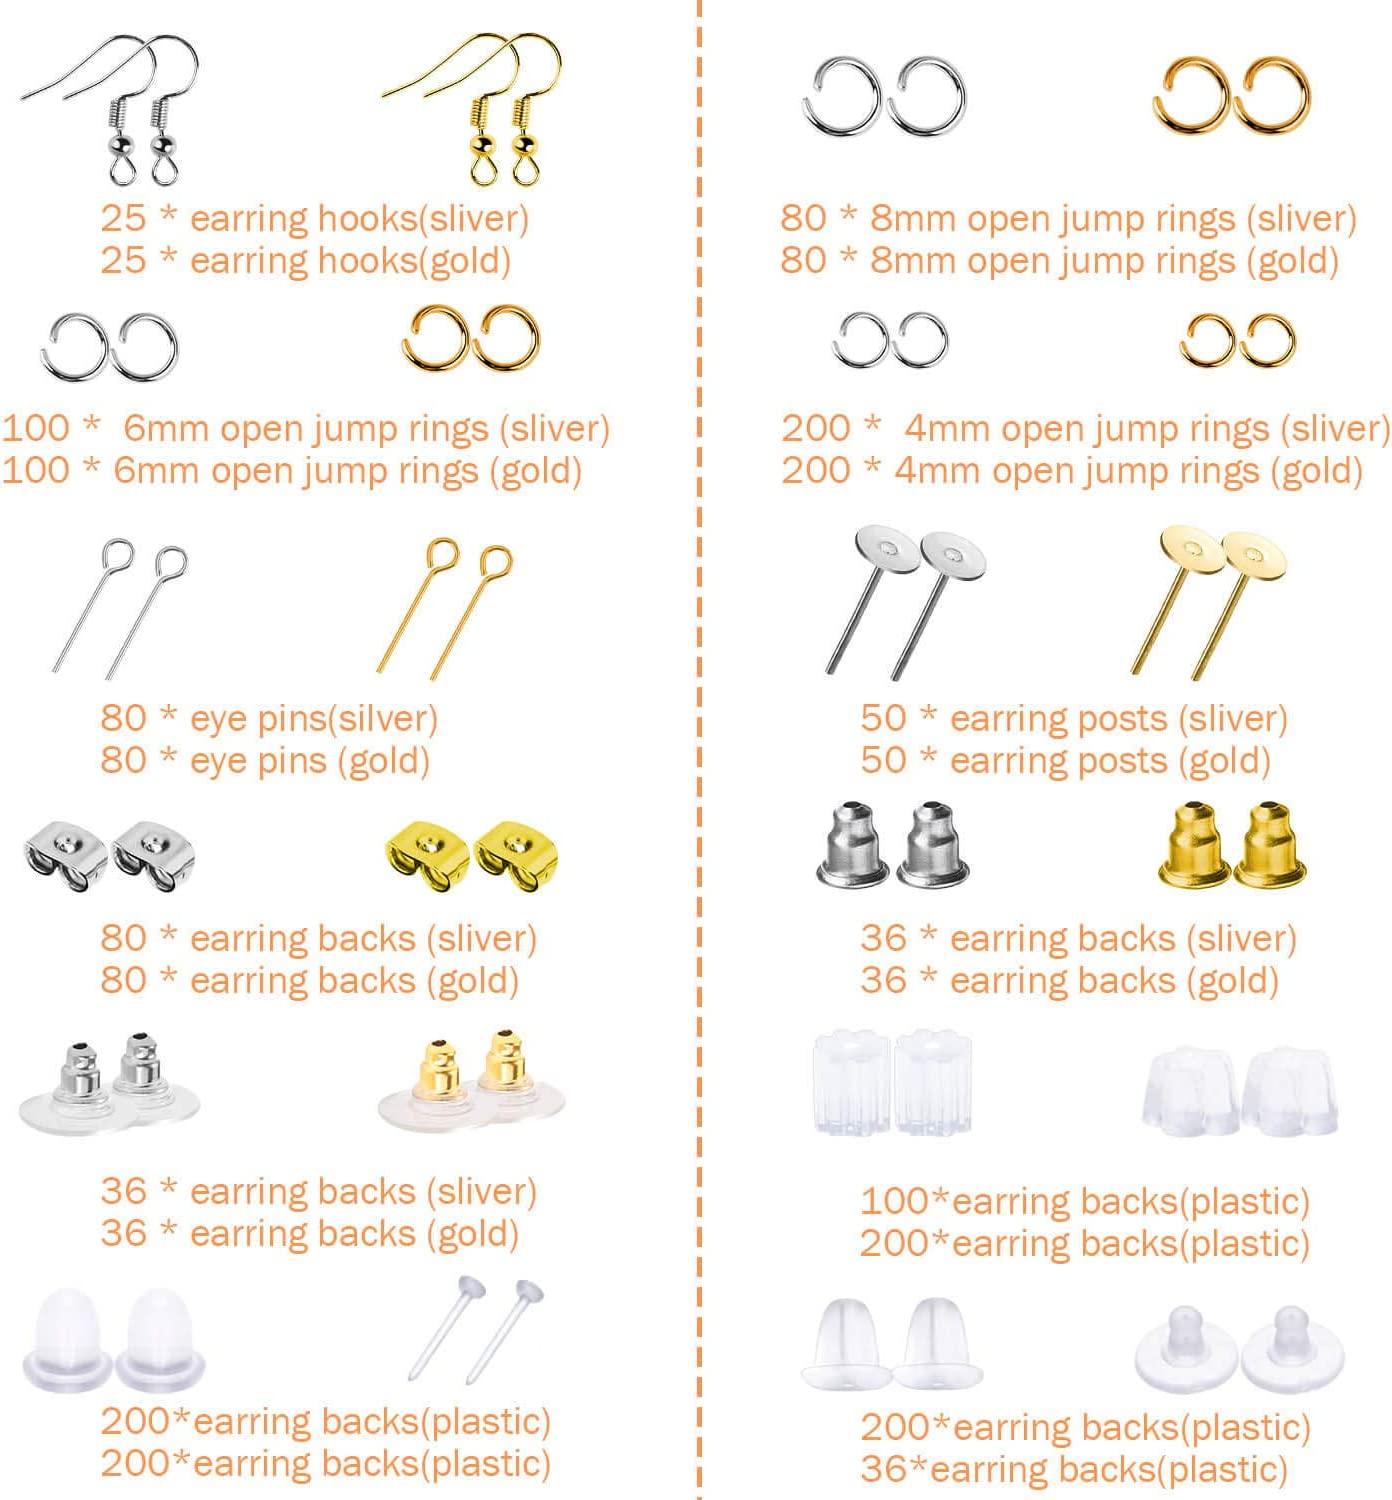 Anezus Earring Making Kit with Earring Hooks Findings, Earring Backs Posts,  Jump Rings for Jewelry Making Supplies, 2320Pcs